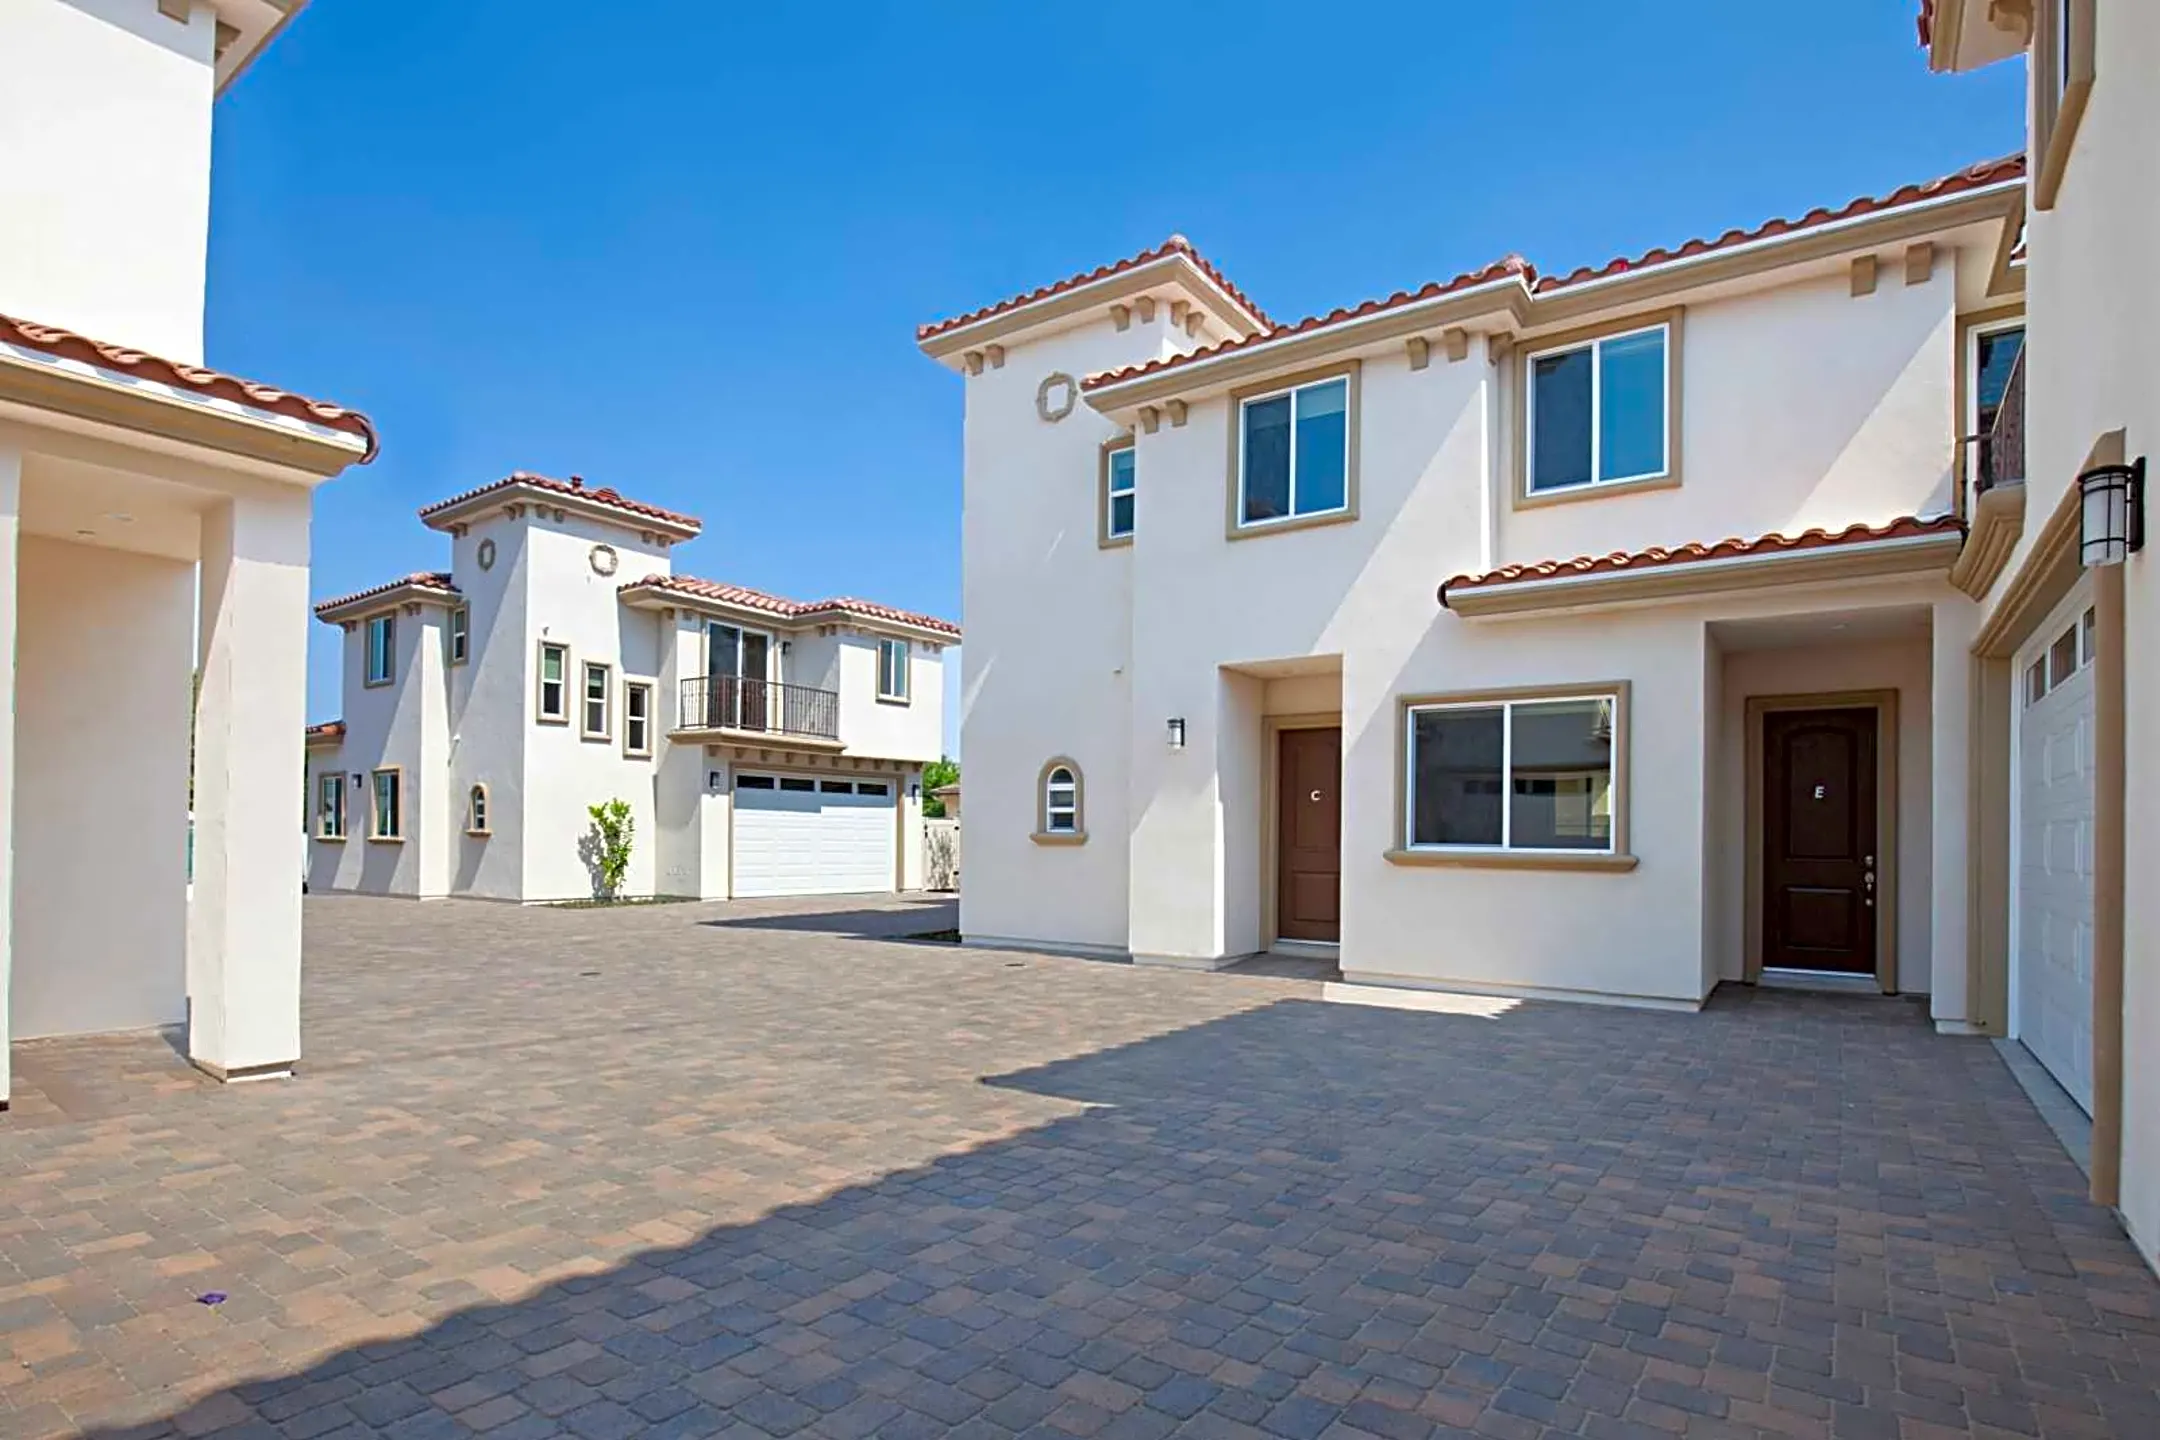 Building - Jersey Townhomes - Artesia, CA